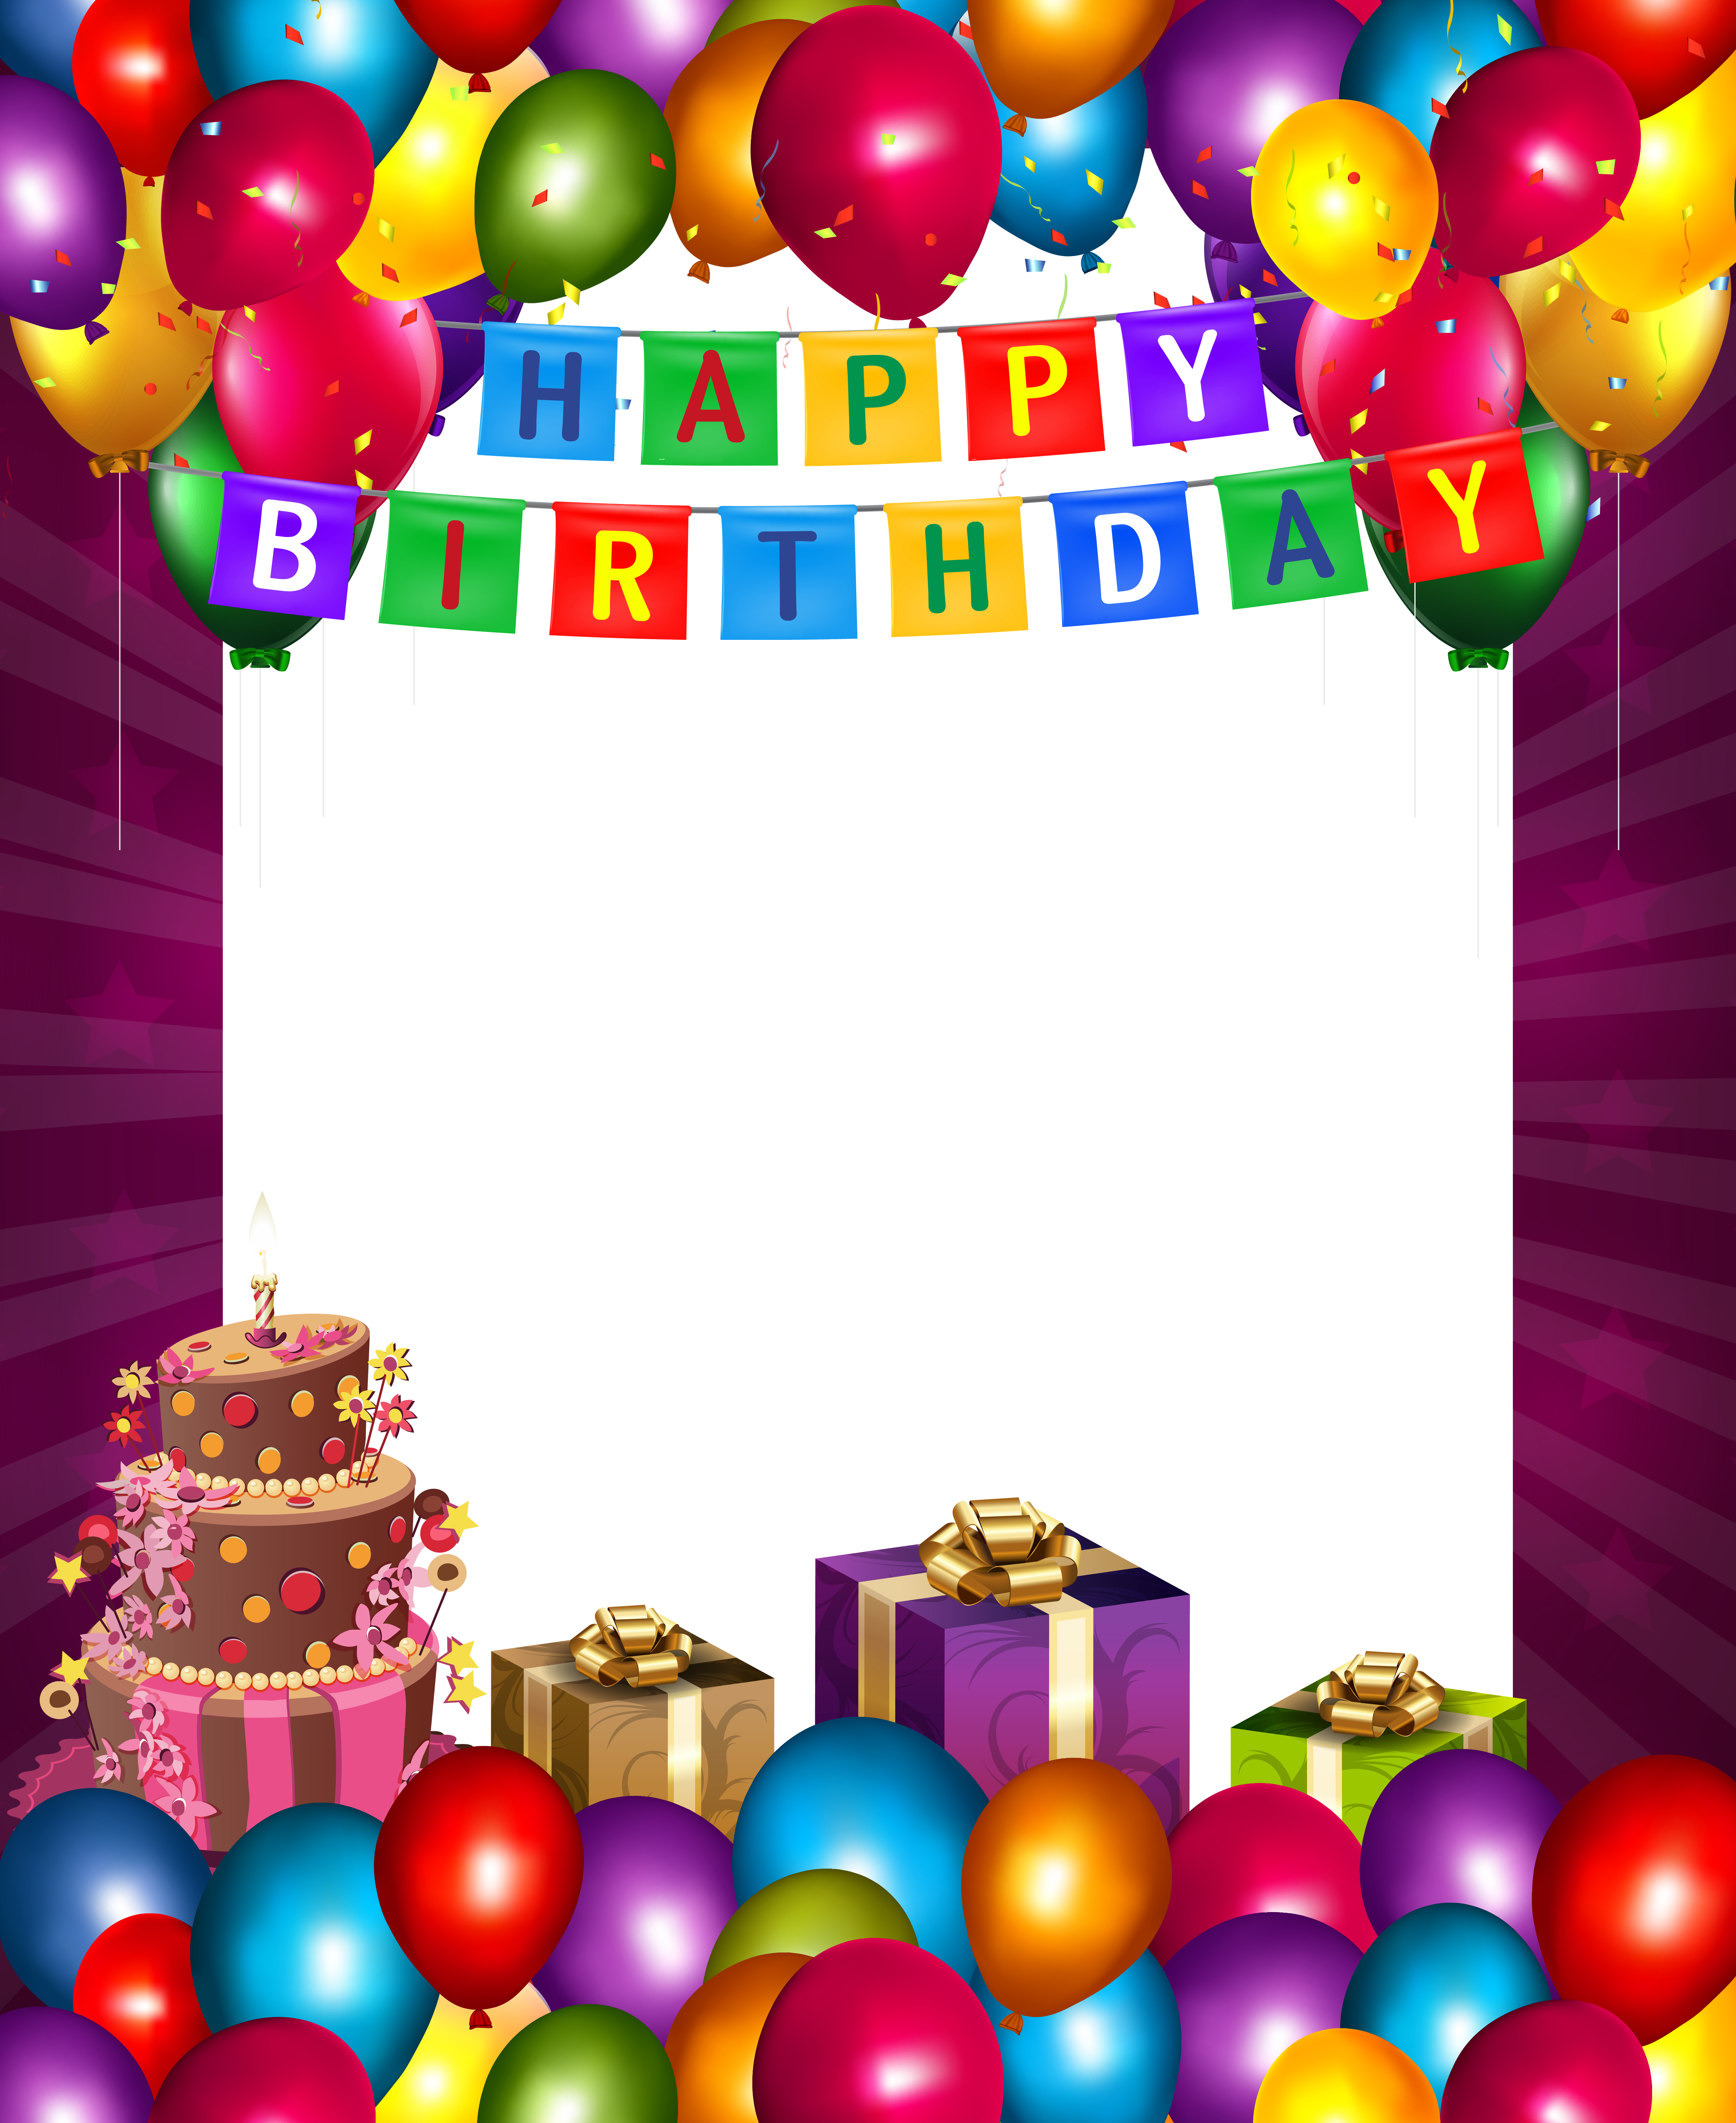 Happy birthday frame png. With balloons transparent gallery